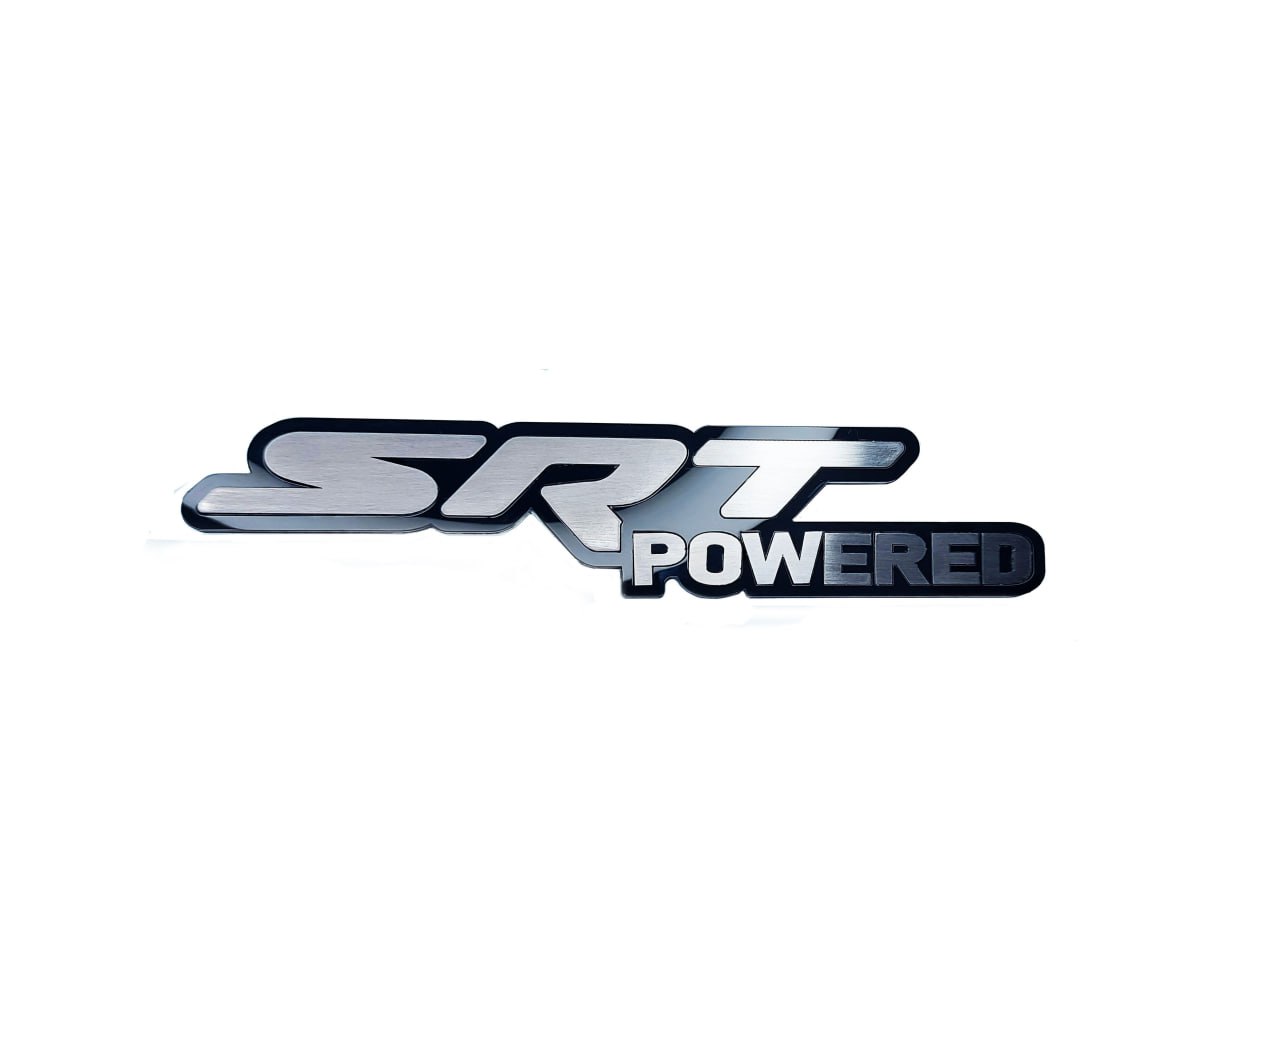 Jeep tailgate trunk rear emblem with SRT powered logo - decoinfabric